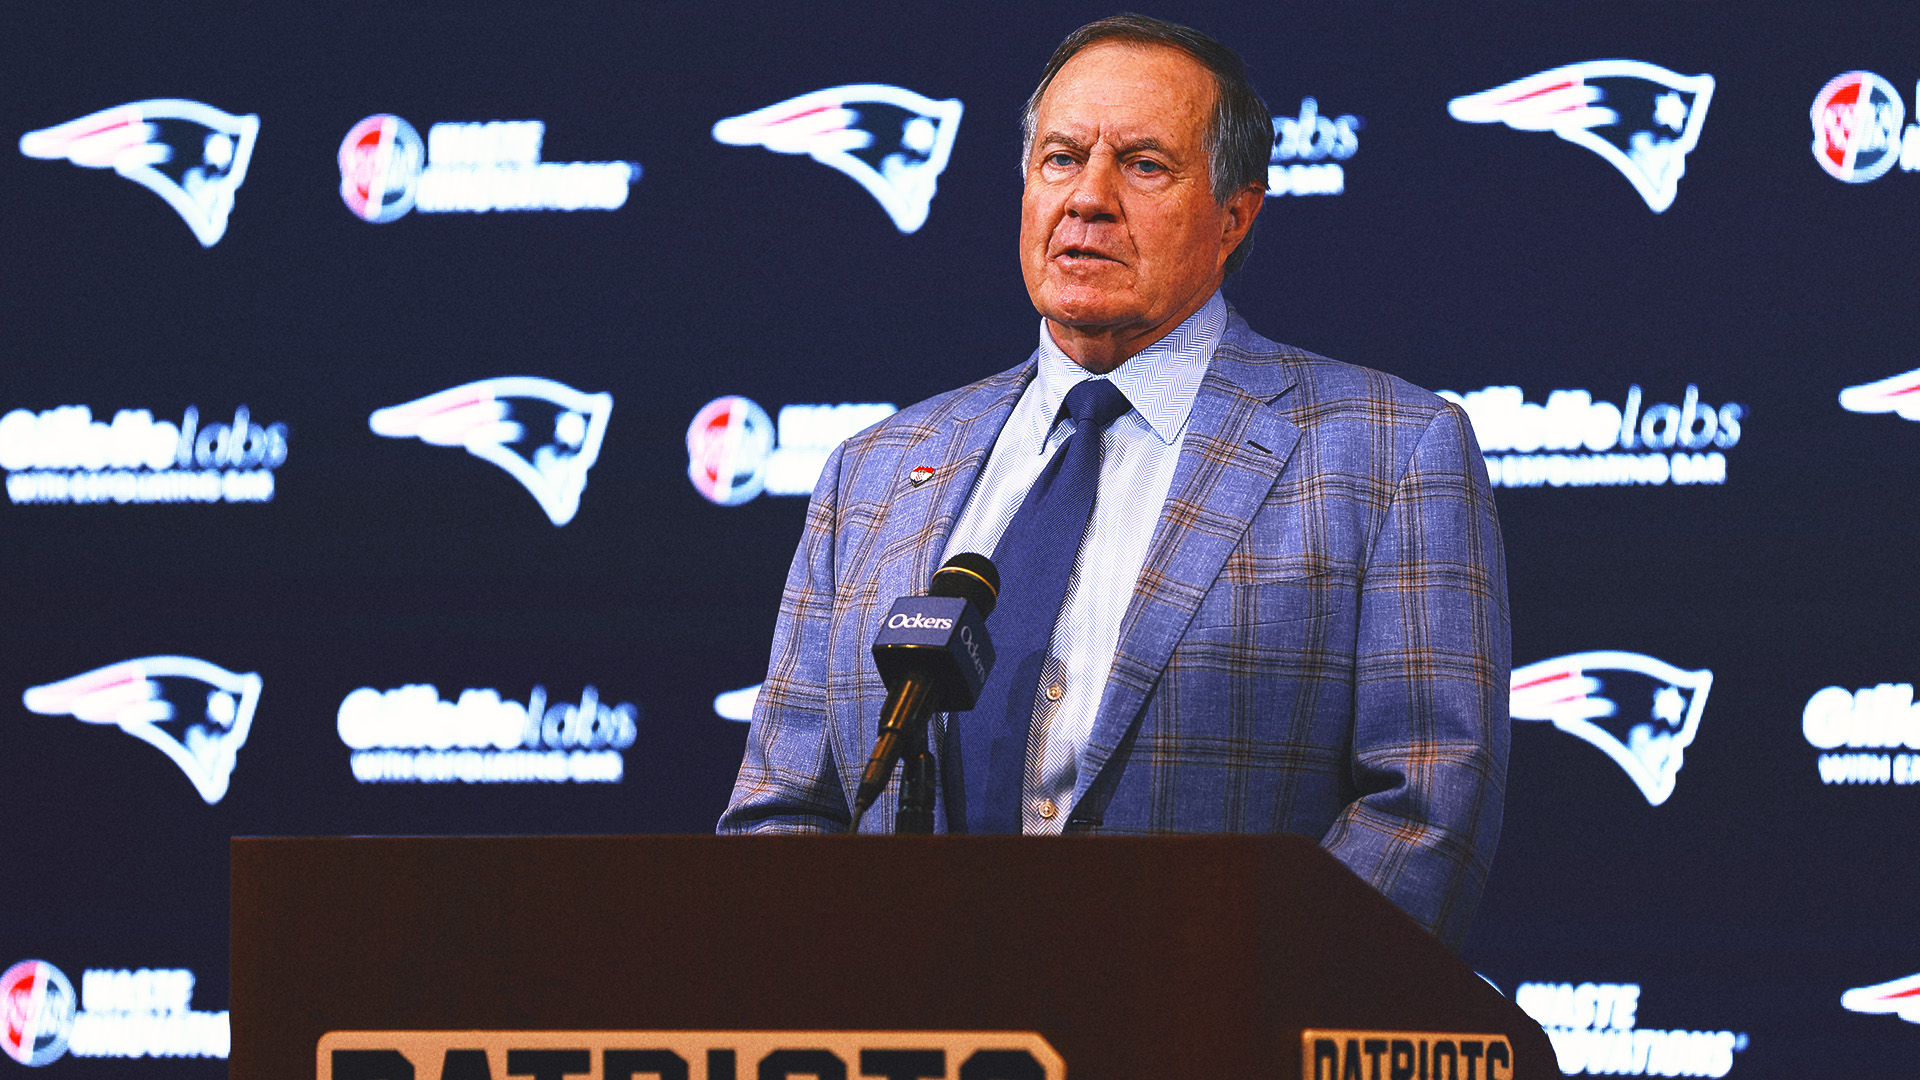 Falcons announce they've interviewed Bill Belichick to be their next head coach